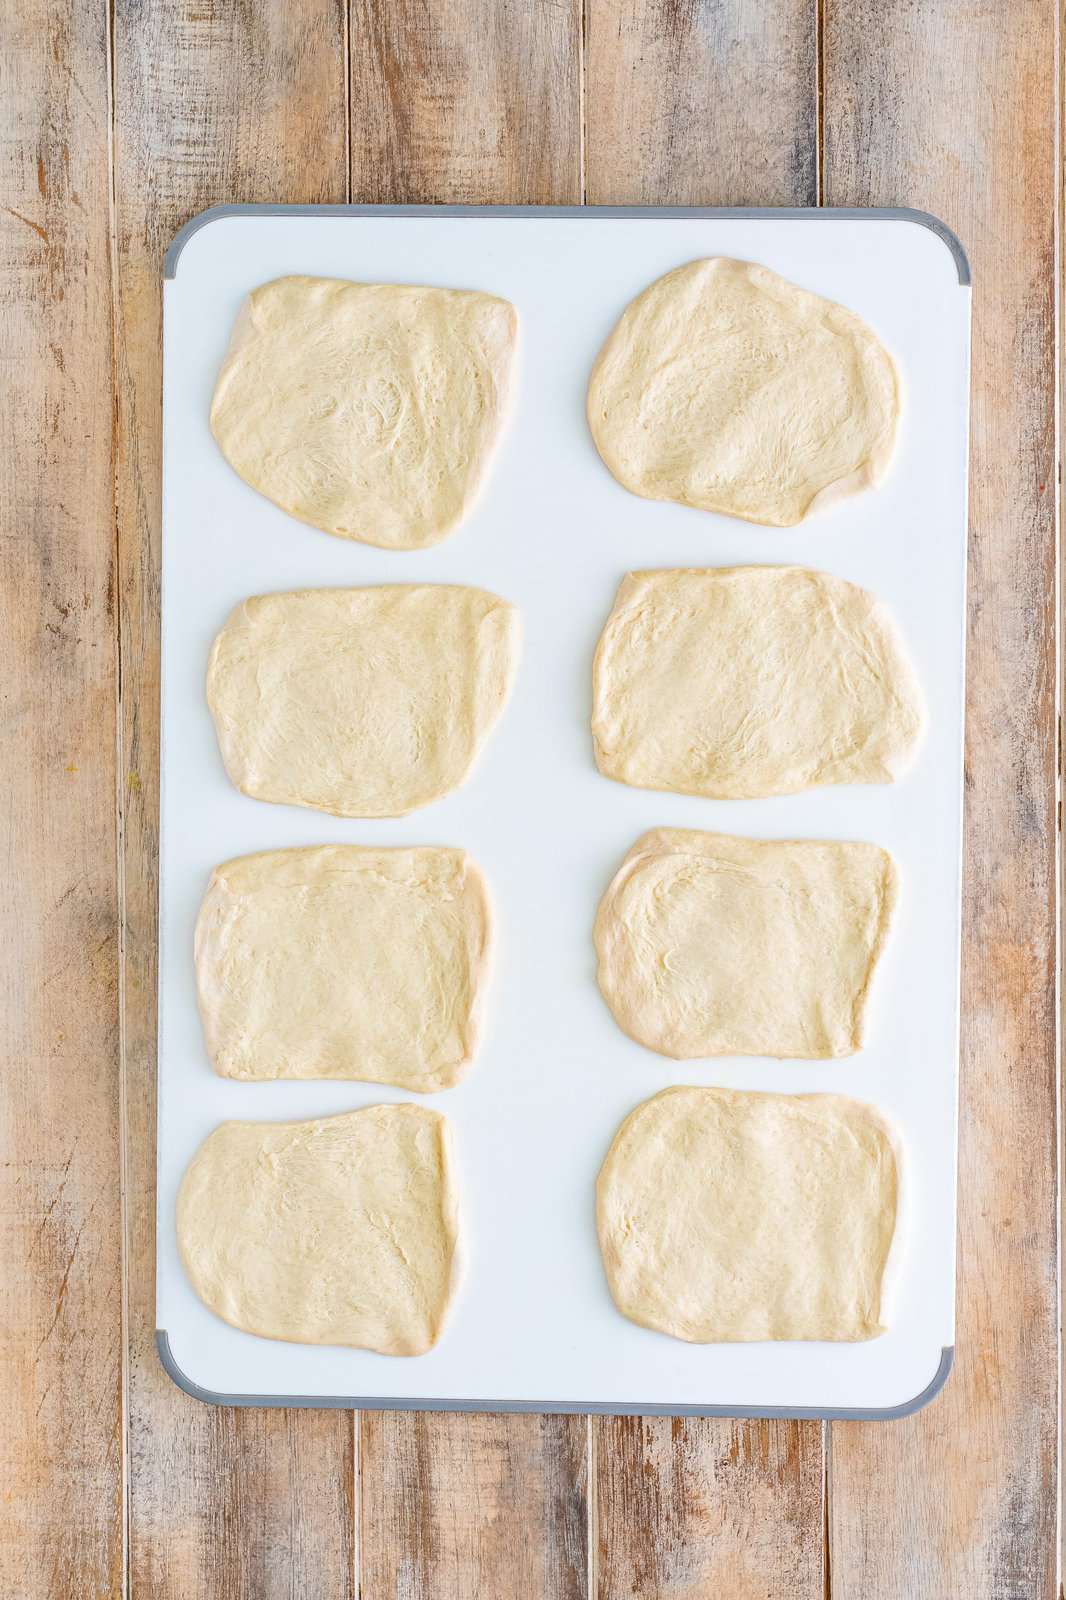 Flattened bread dough in 8 pieces.